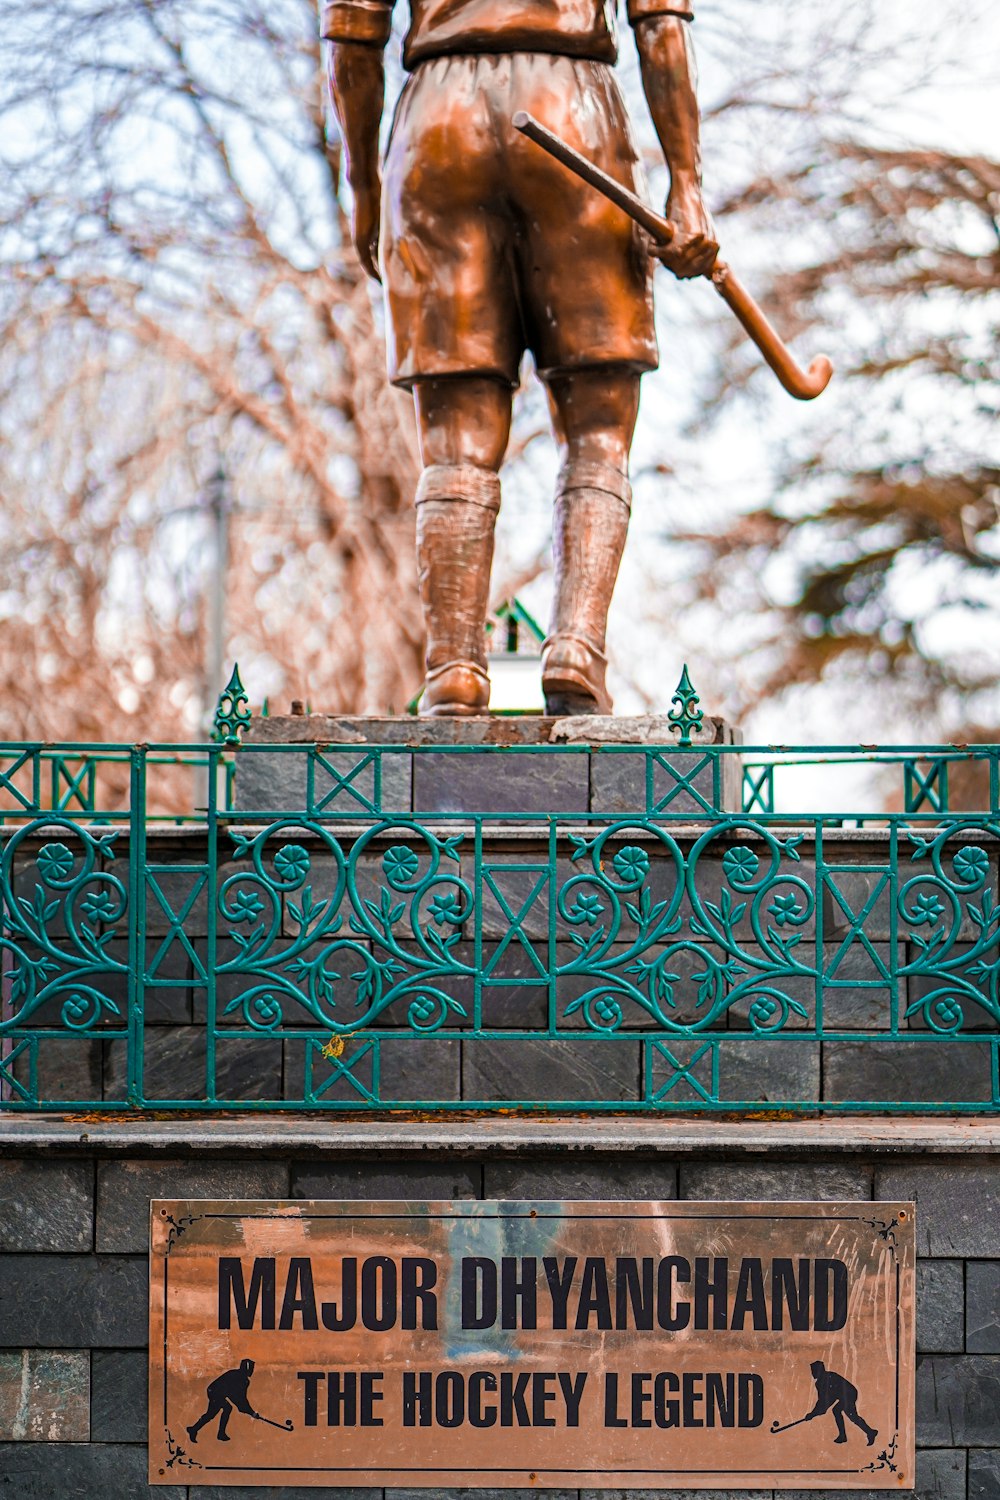 a statue of a person holding a sword on a railing